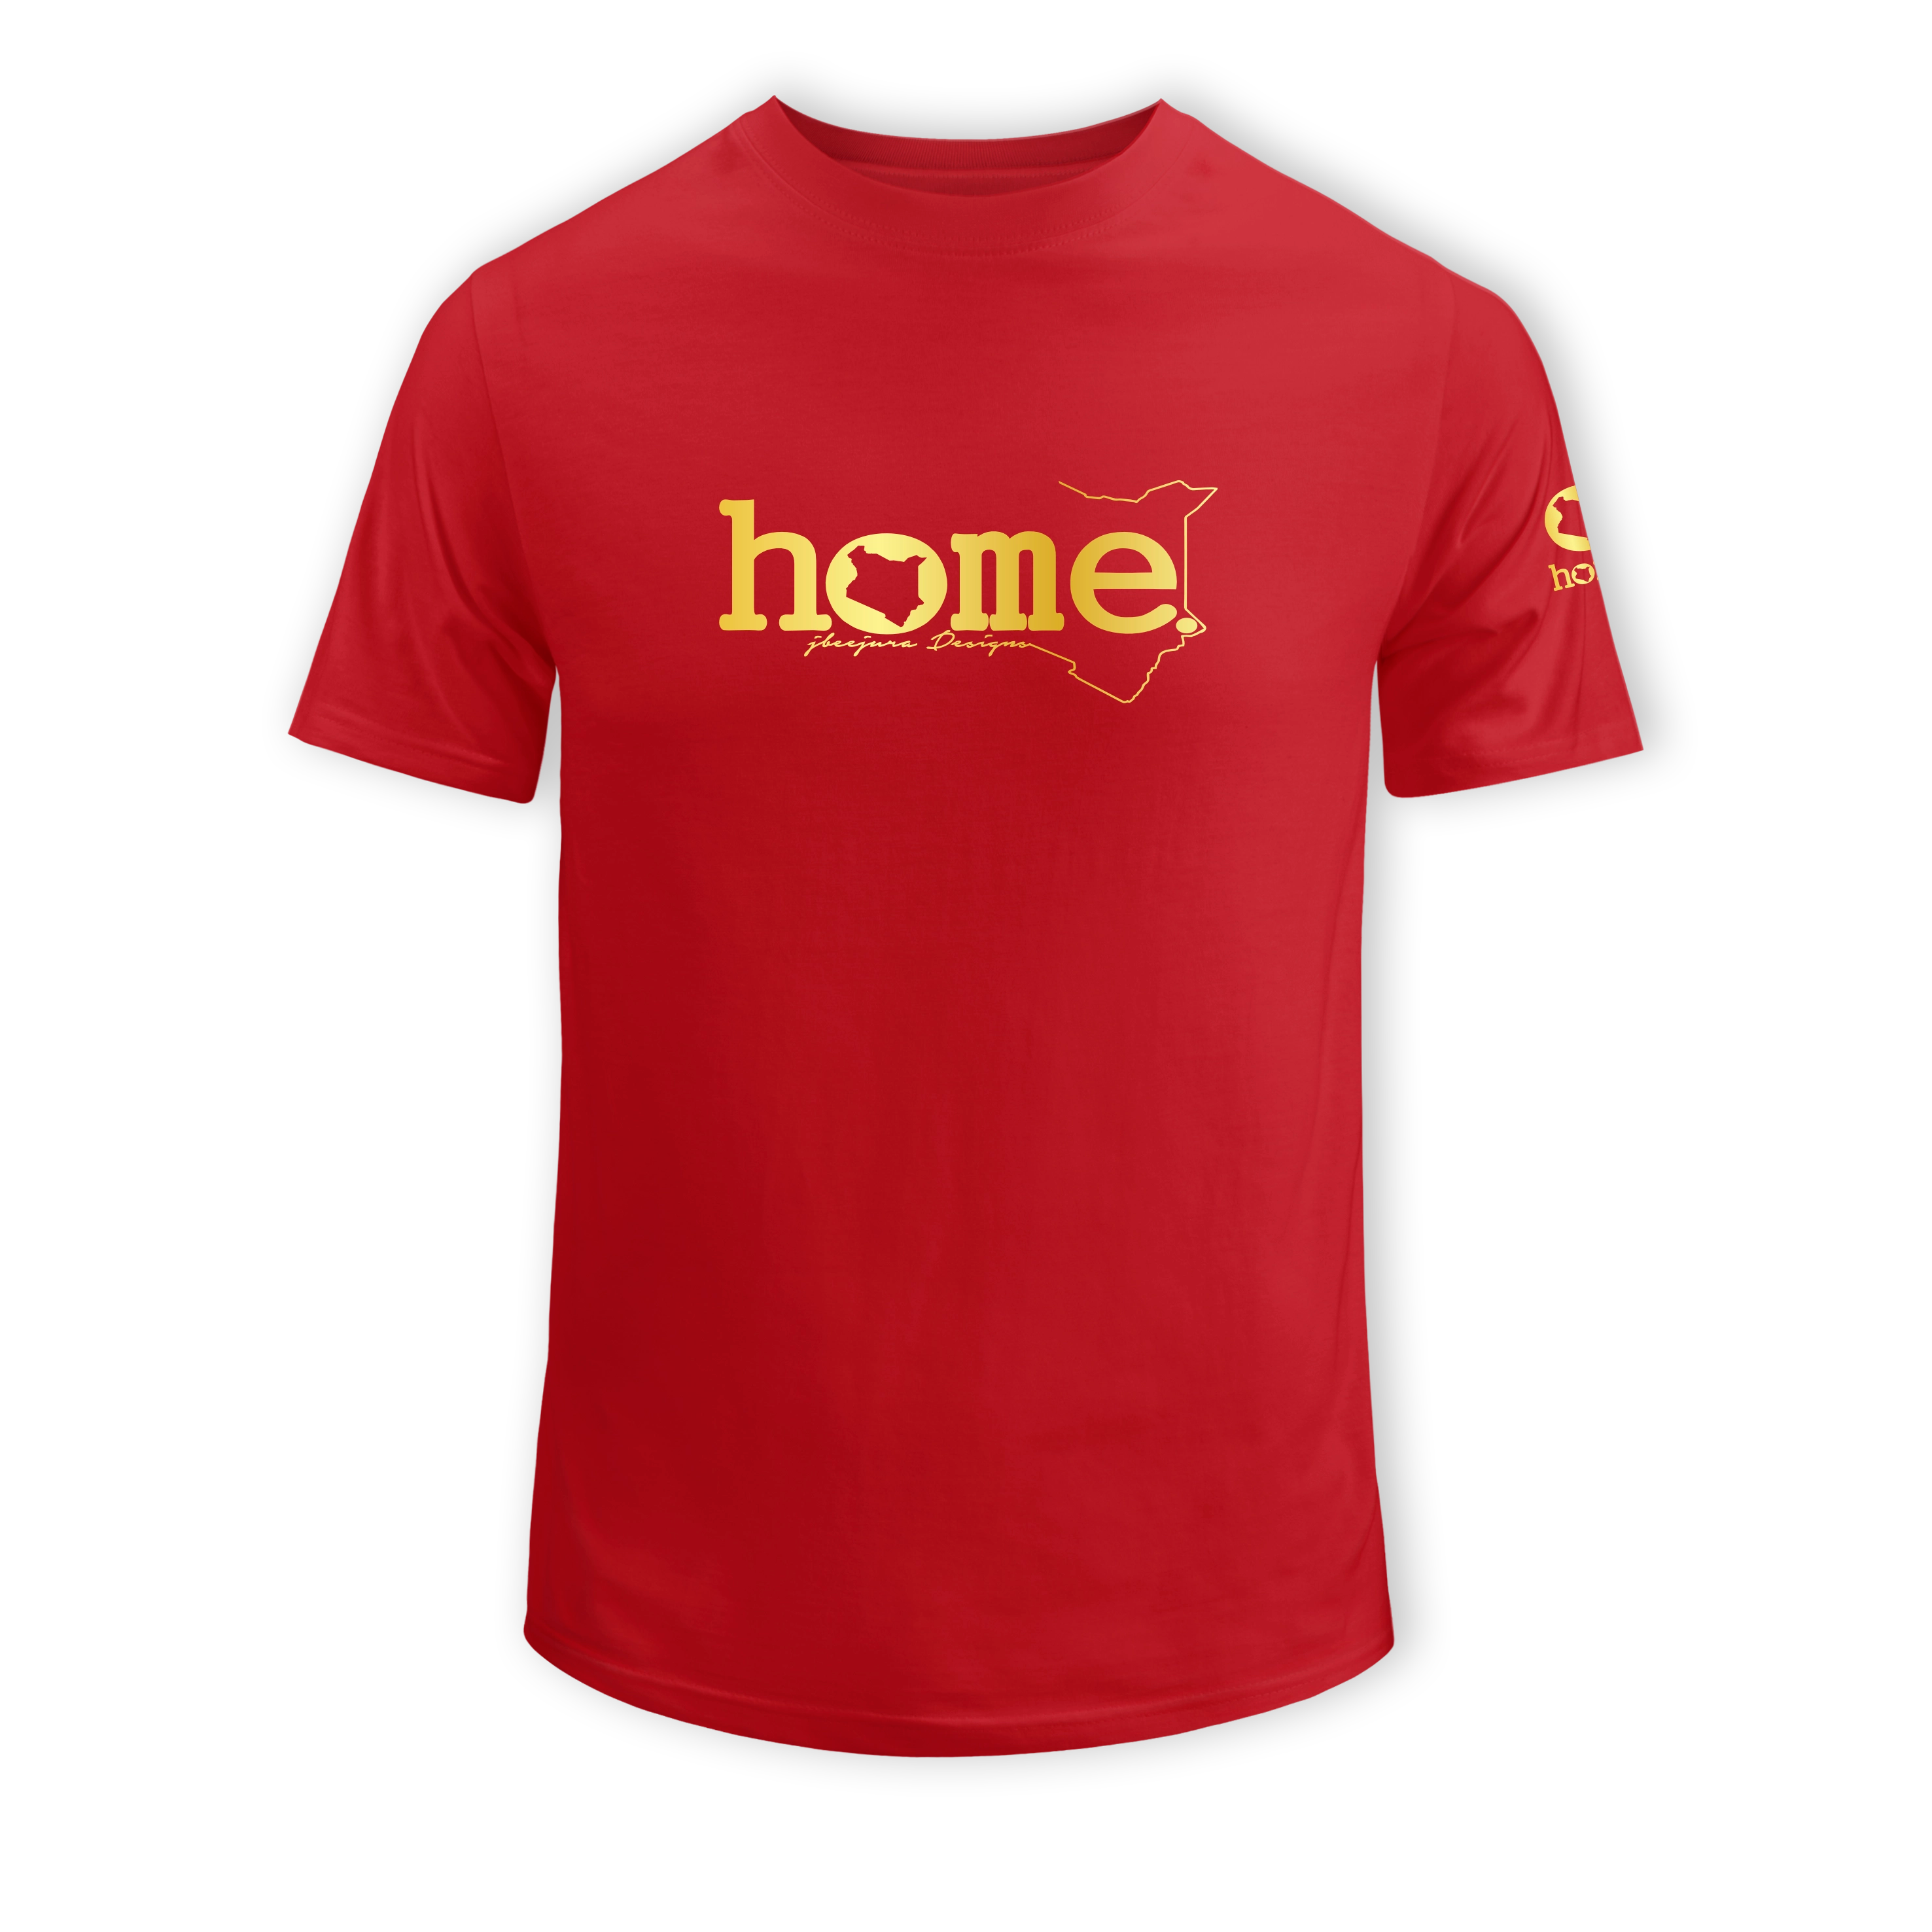 home_254 KIDS SHORT-SLEEVED RED T-SHIRT WITH A GOLD CLASSIC WORDS PRINT – COTTON PLUS FABRIC